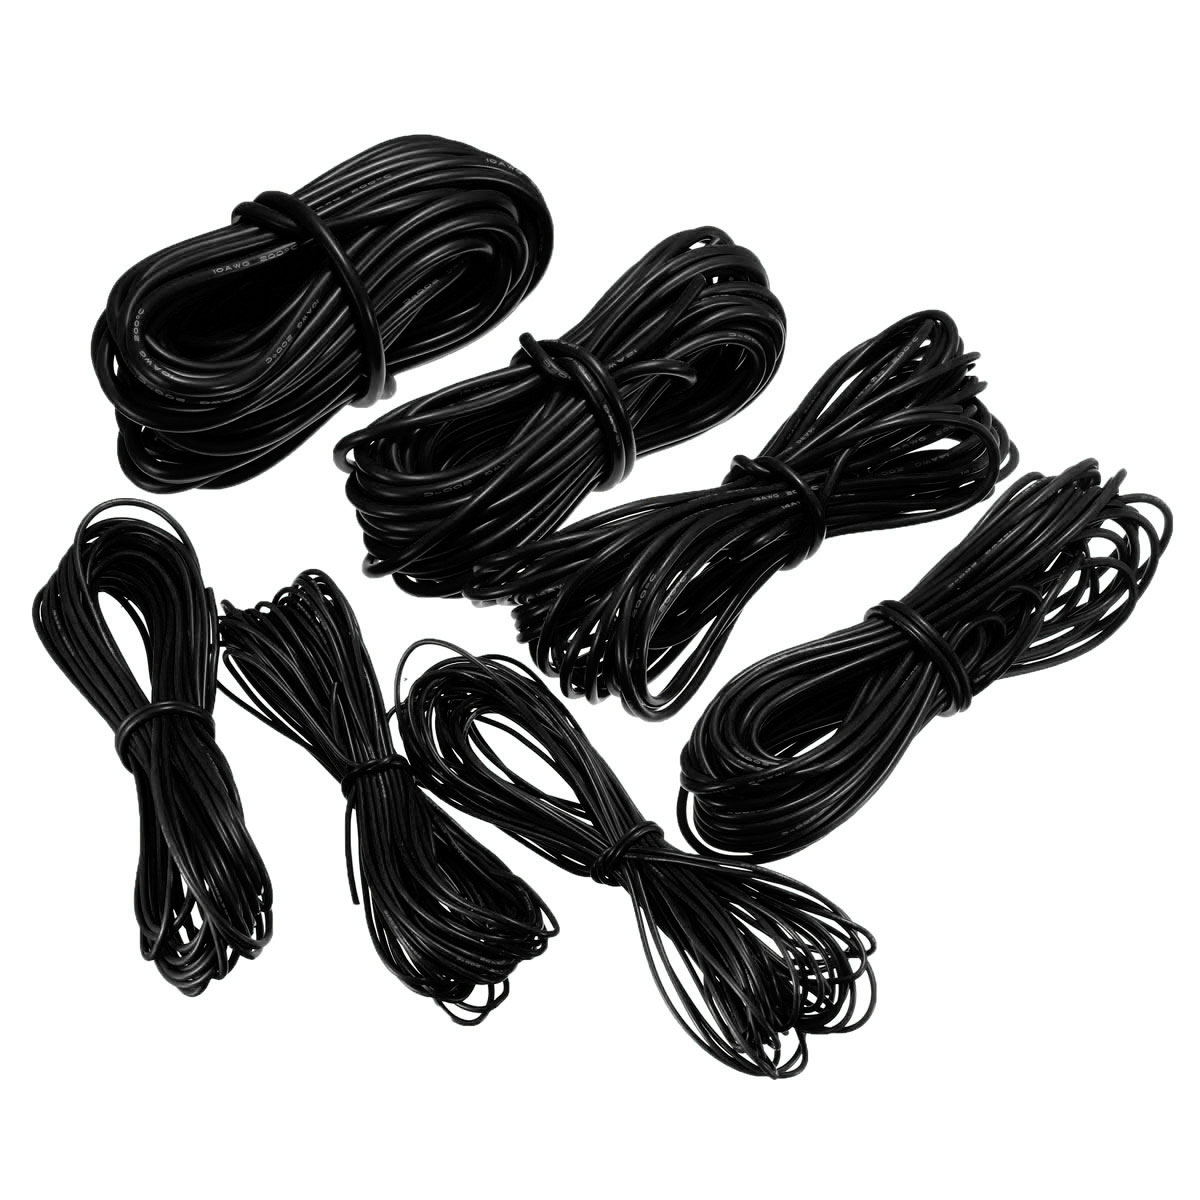 DANIU-10-Meter-Black-Silicone-Wire-Cable-10121416182022AWG-Flexible-Cable-1170303-2